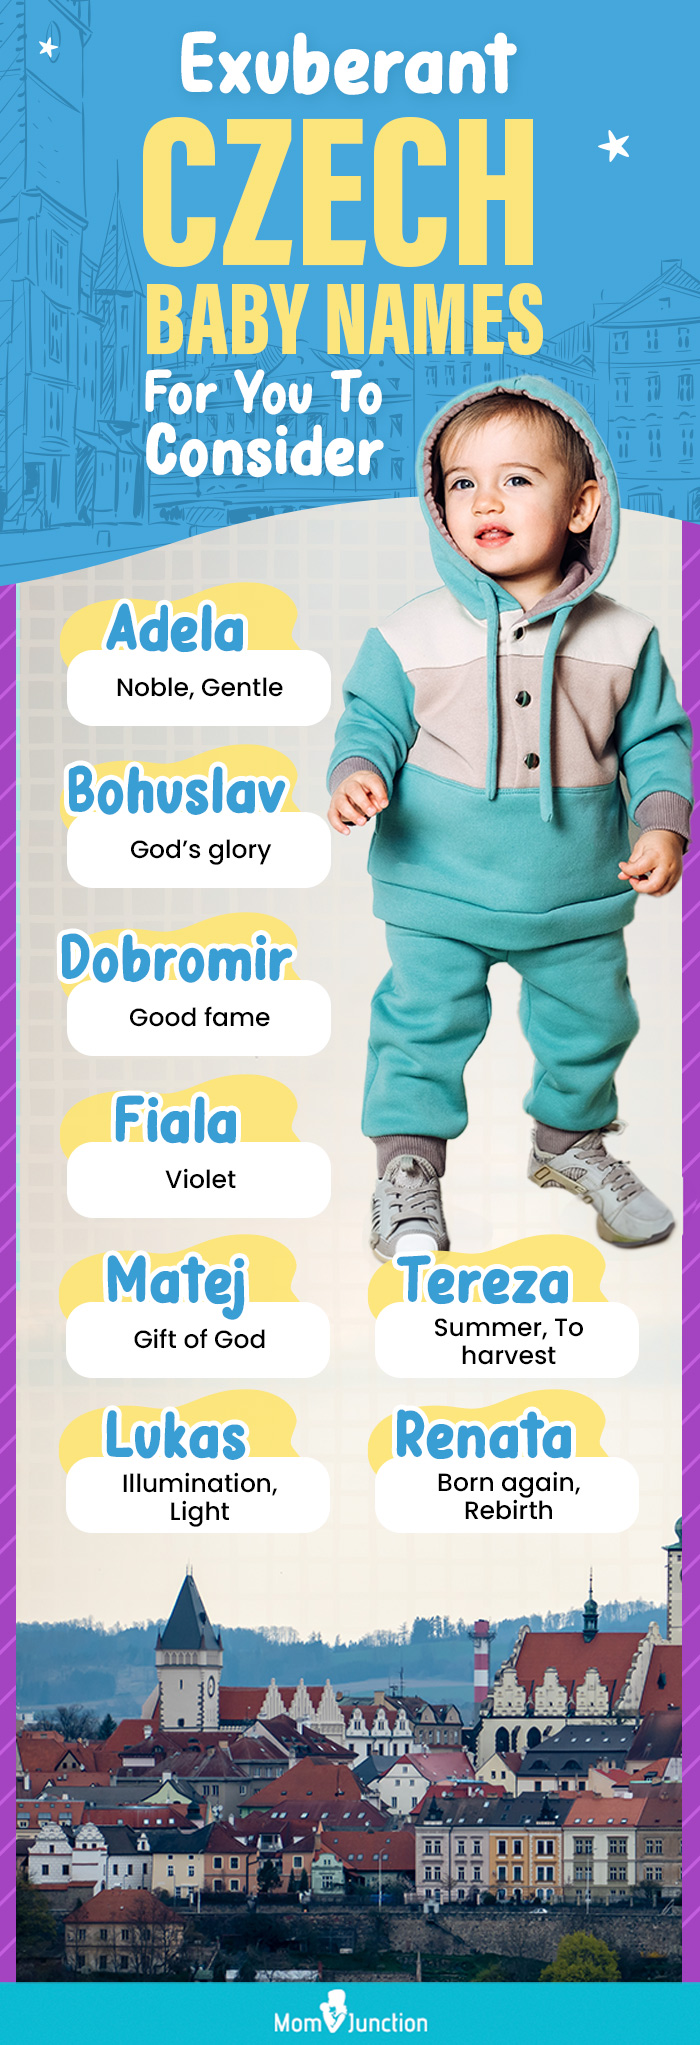 exuberant czech baby names for you to consider (infographic)